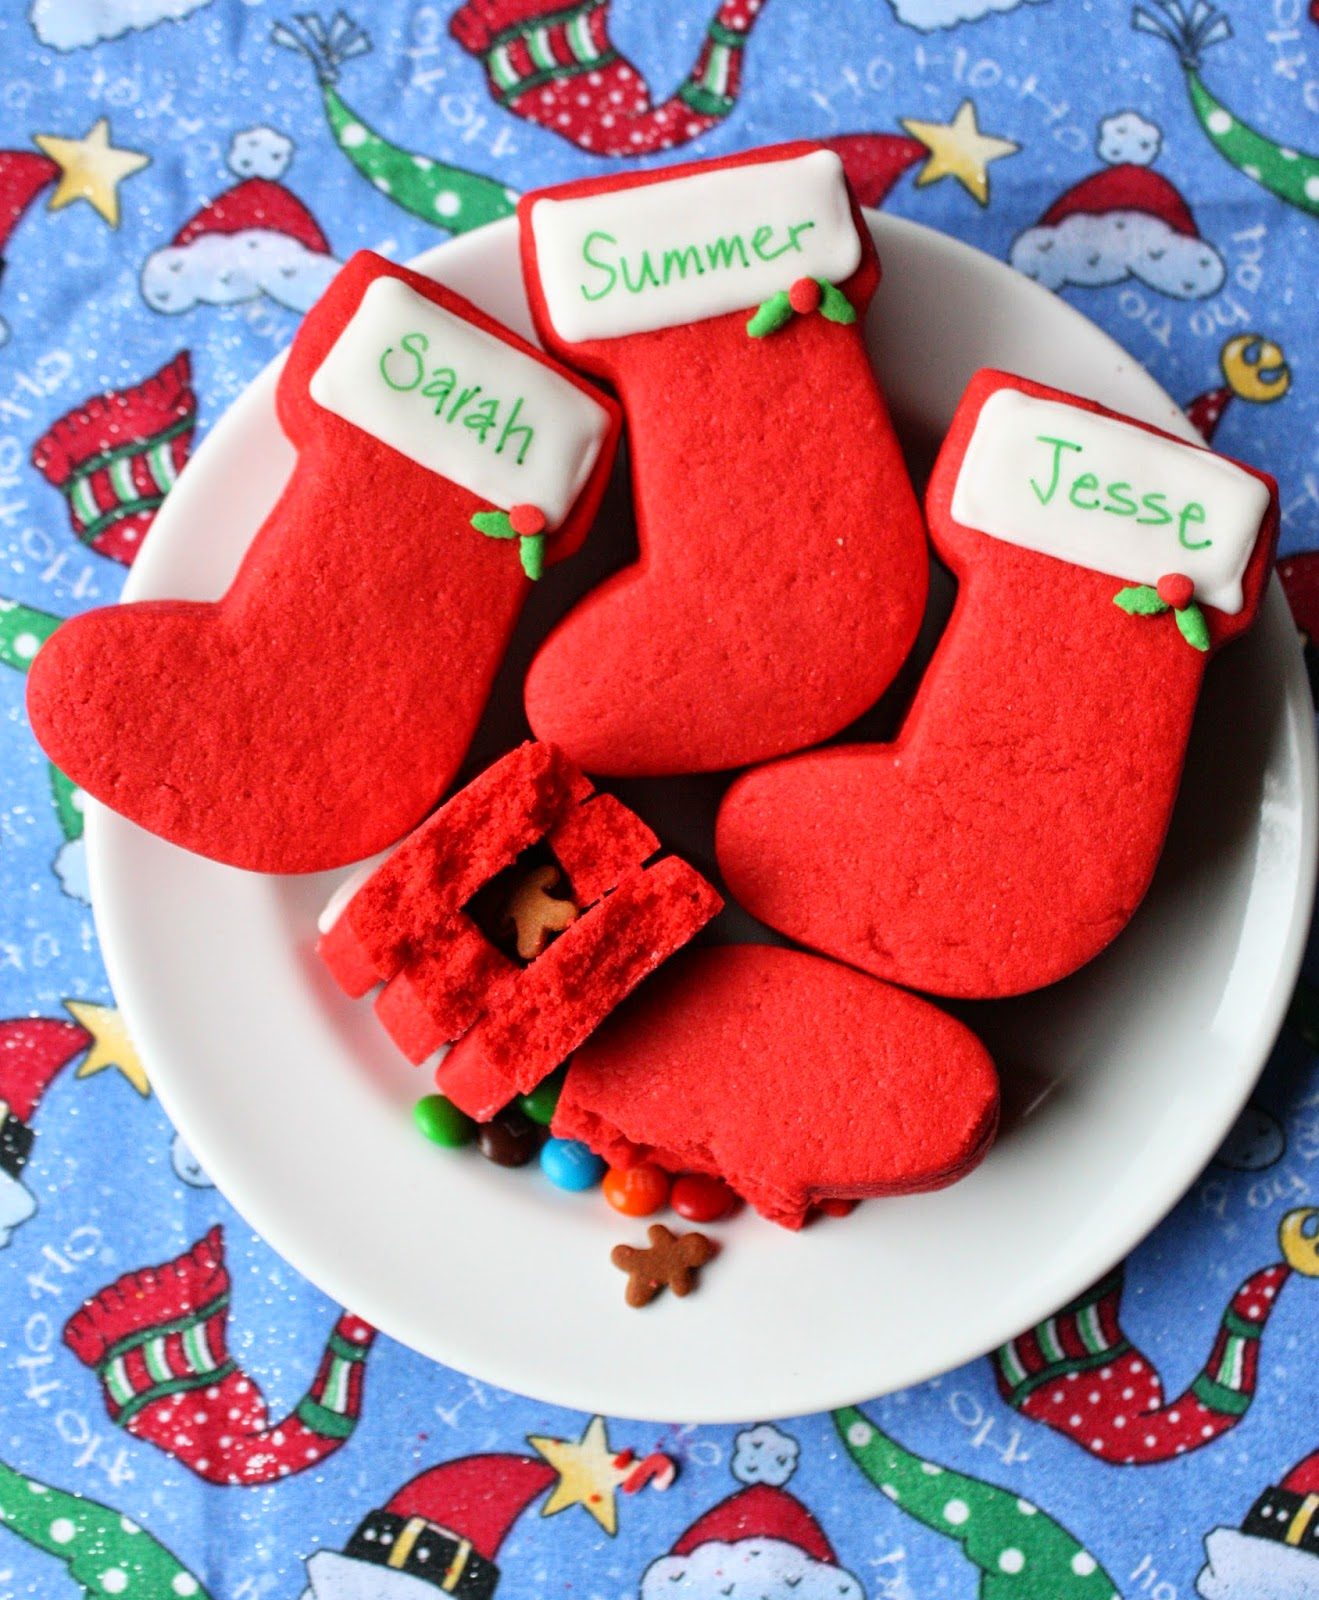 Surprise-inside Christmas Stocking Cookies, Lay The Table